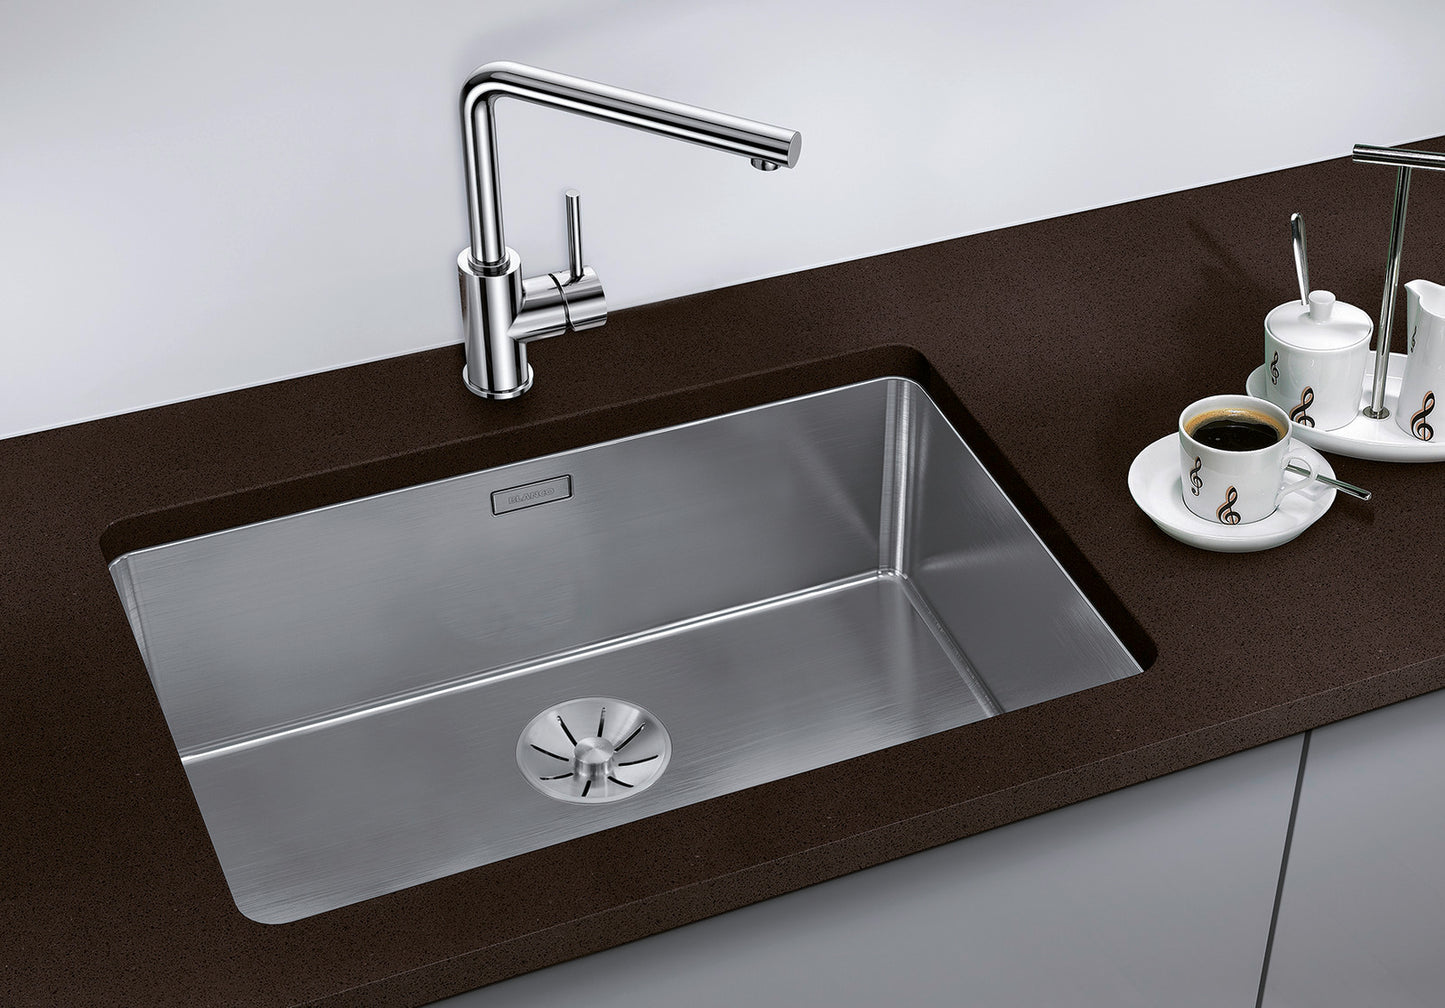 BLANCO Andano 700mm Stainless Steel Sink 德國製造直角方形不銹鋼星盆 | Made in Germany |